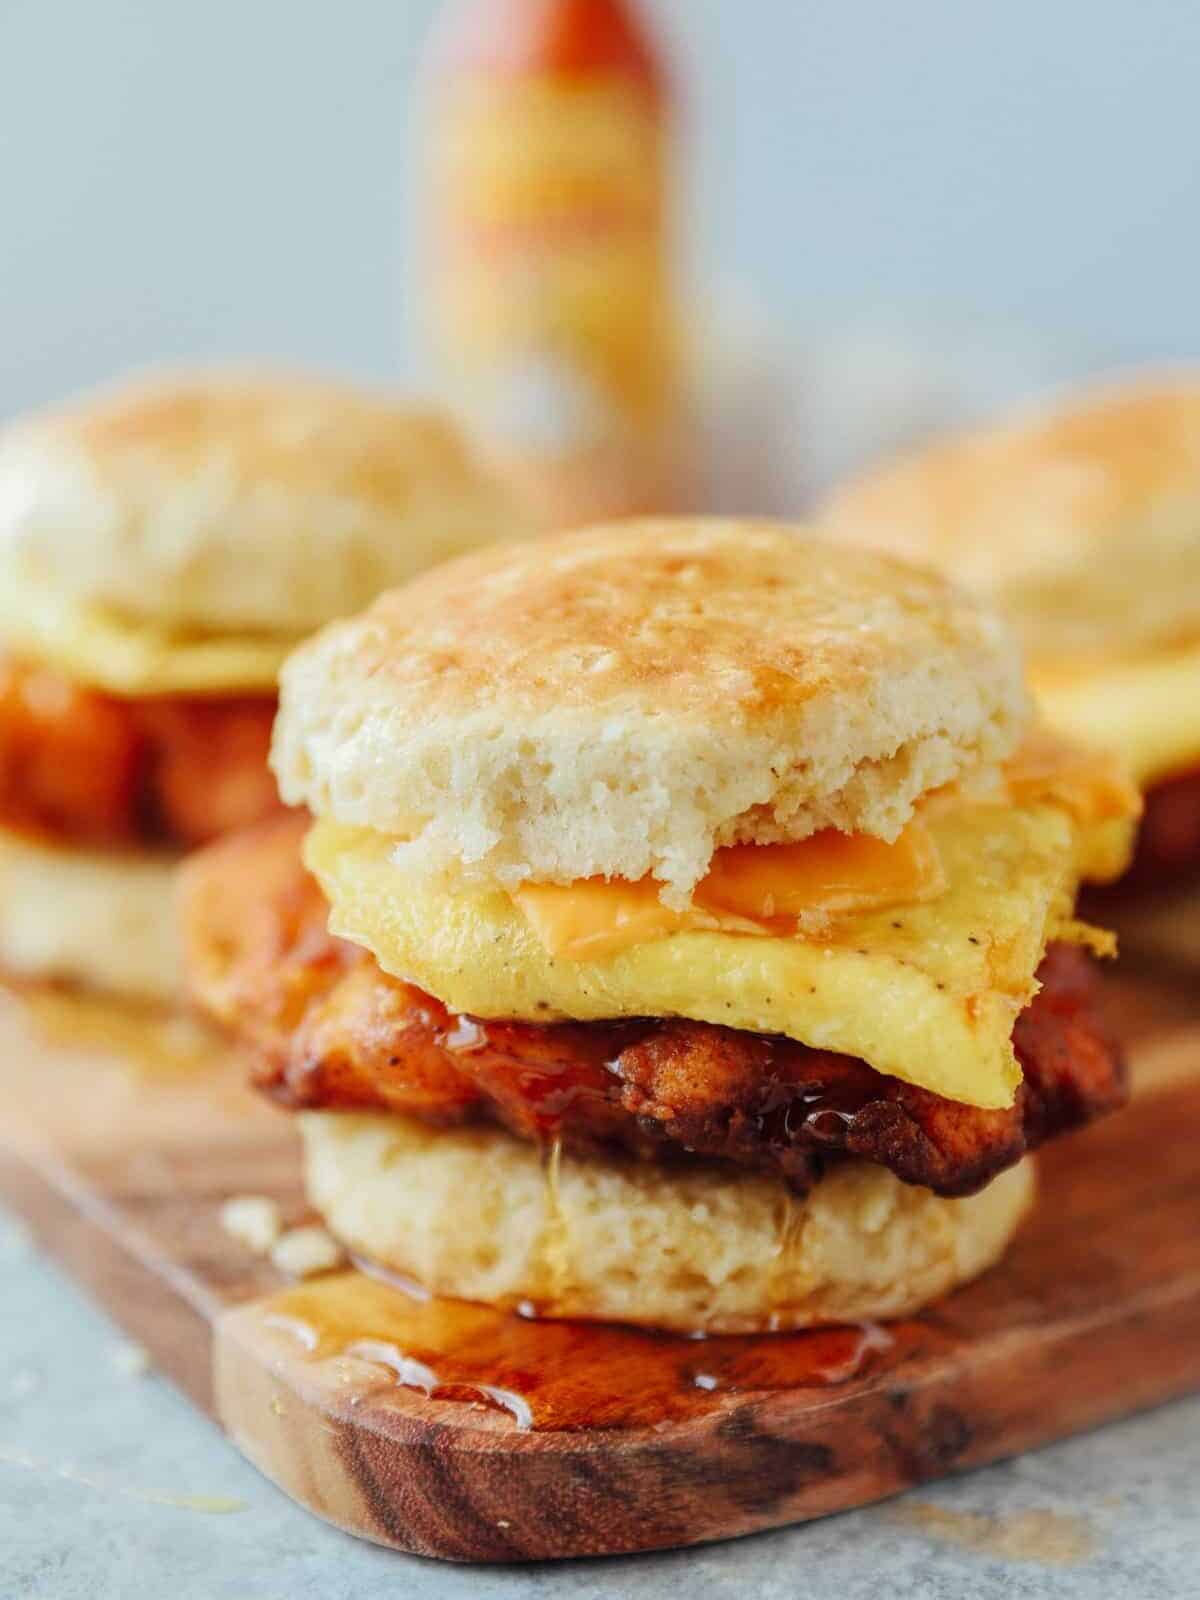 side view of a breakfast sandwich with biscuits, eggs, cheese, and chicken